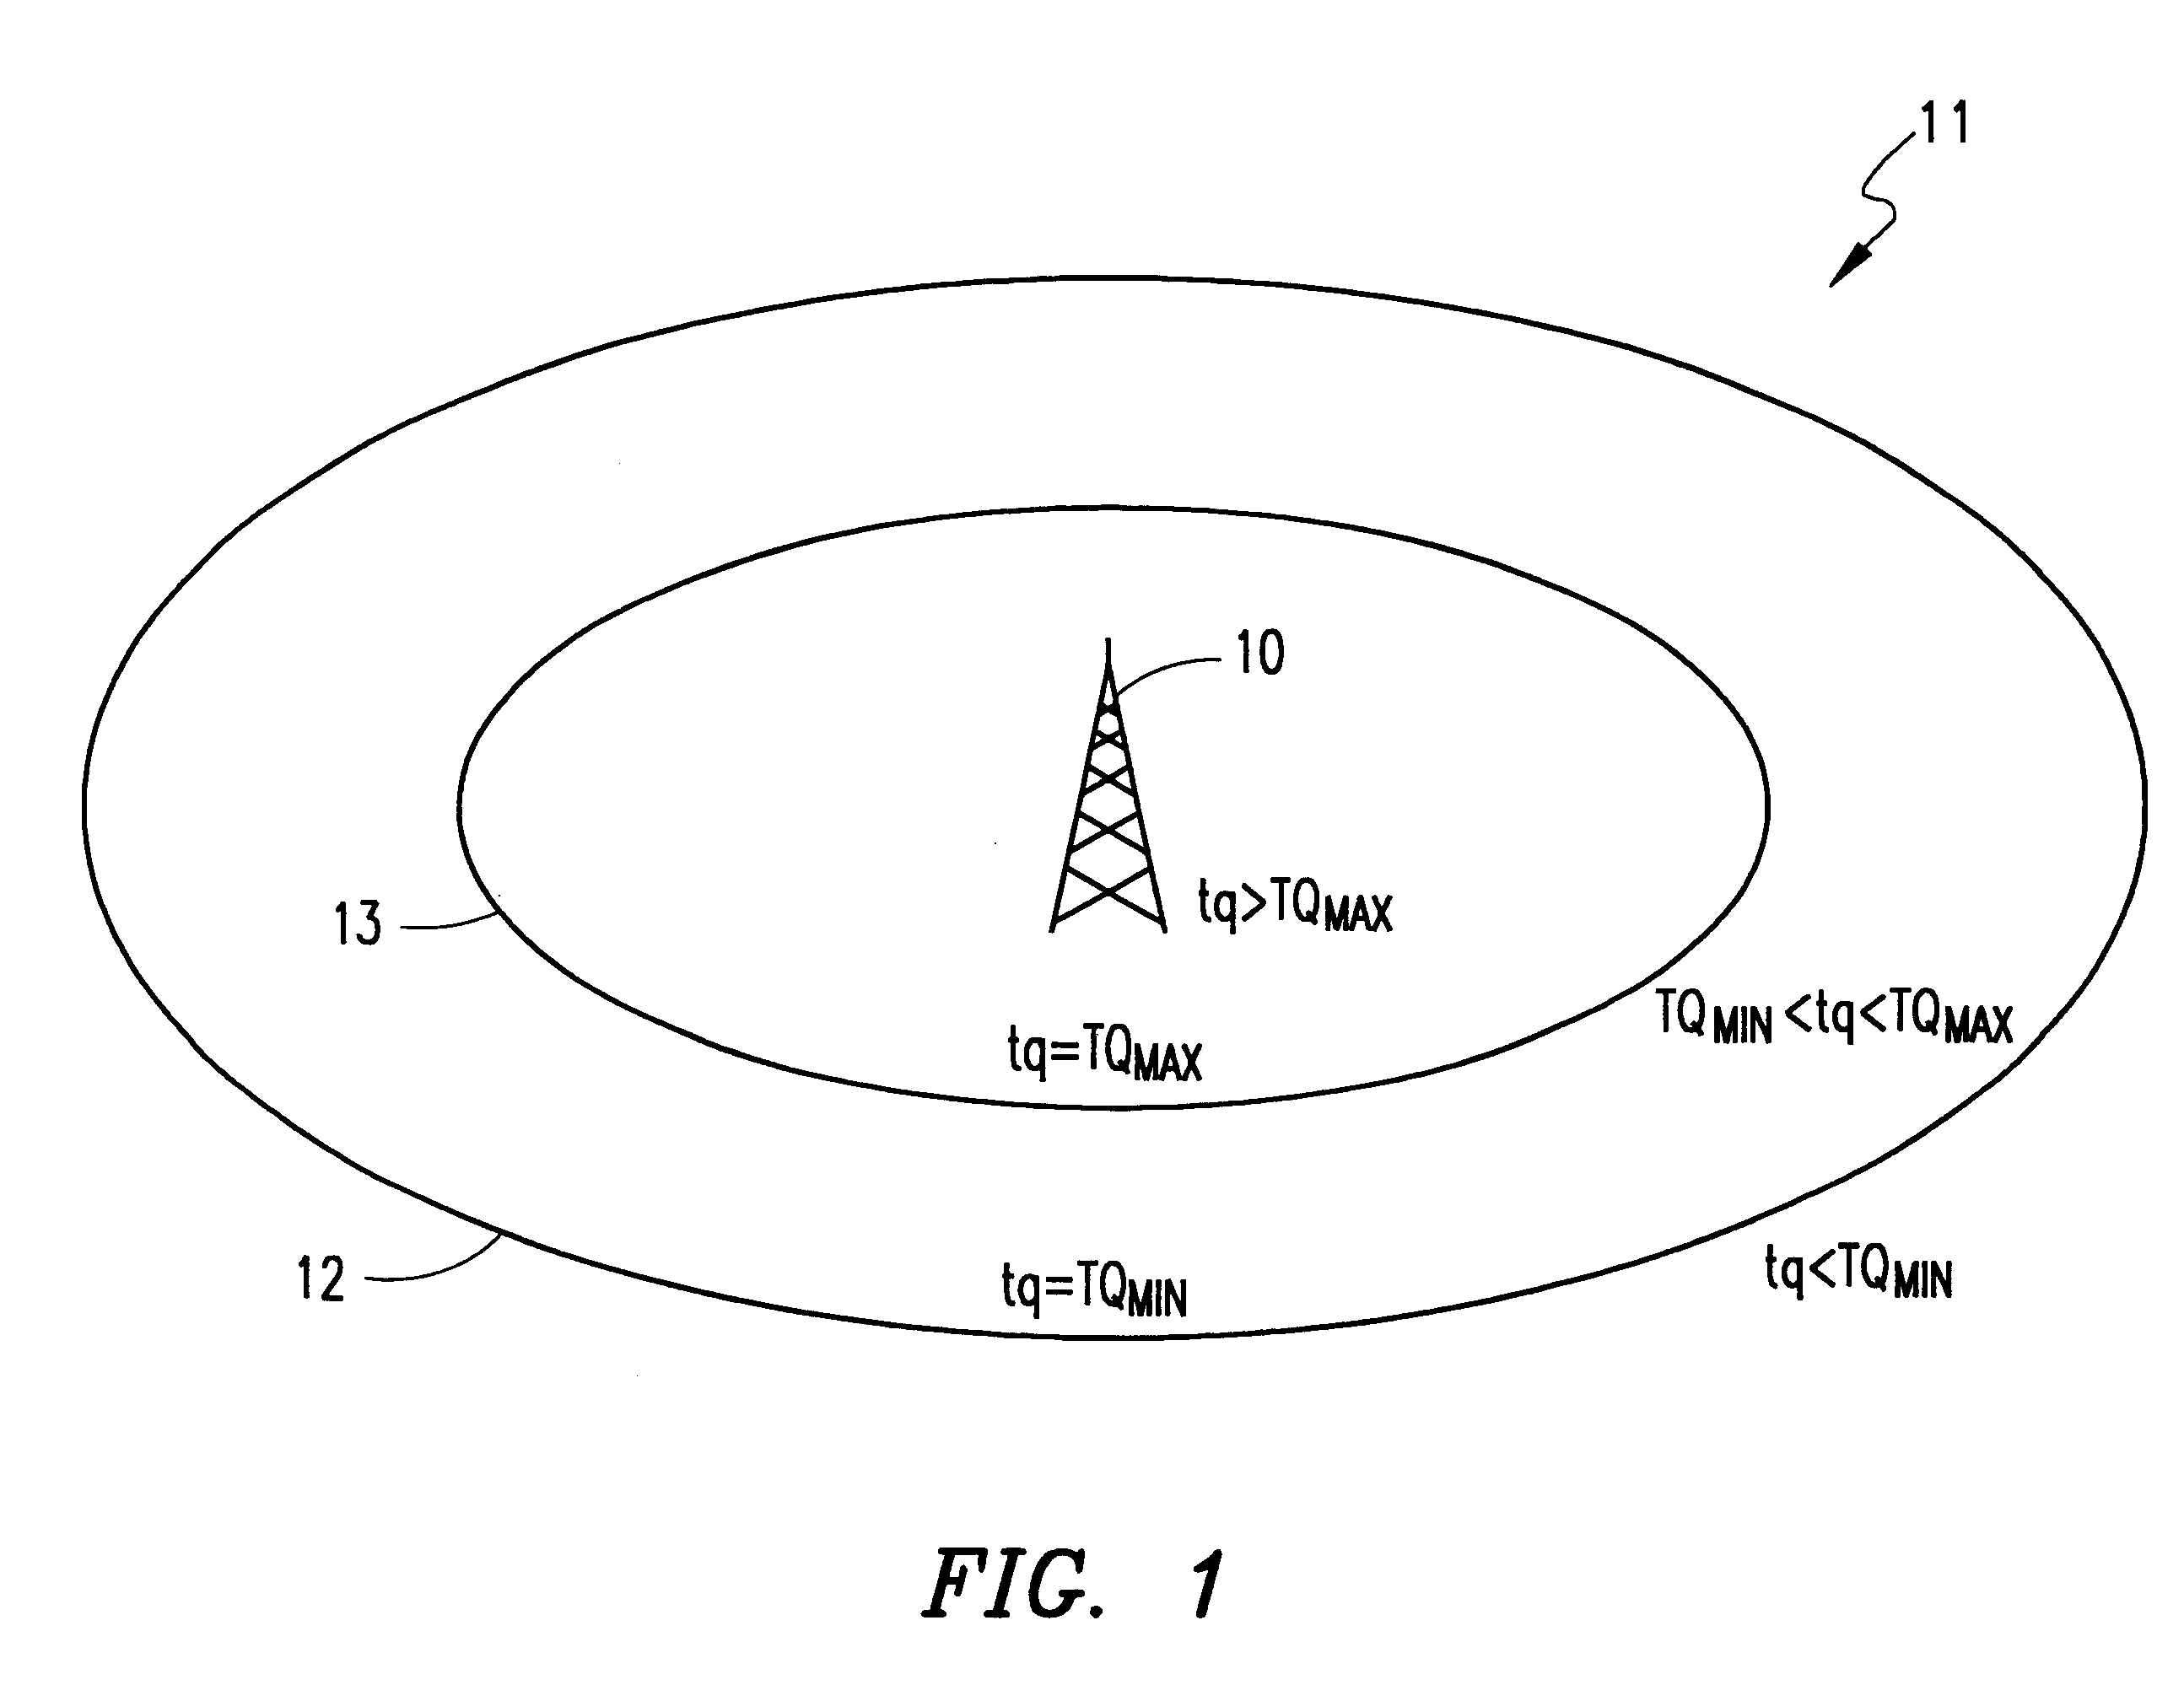 Method of broadcasting a quality over-the-air multicast